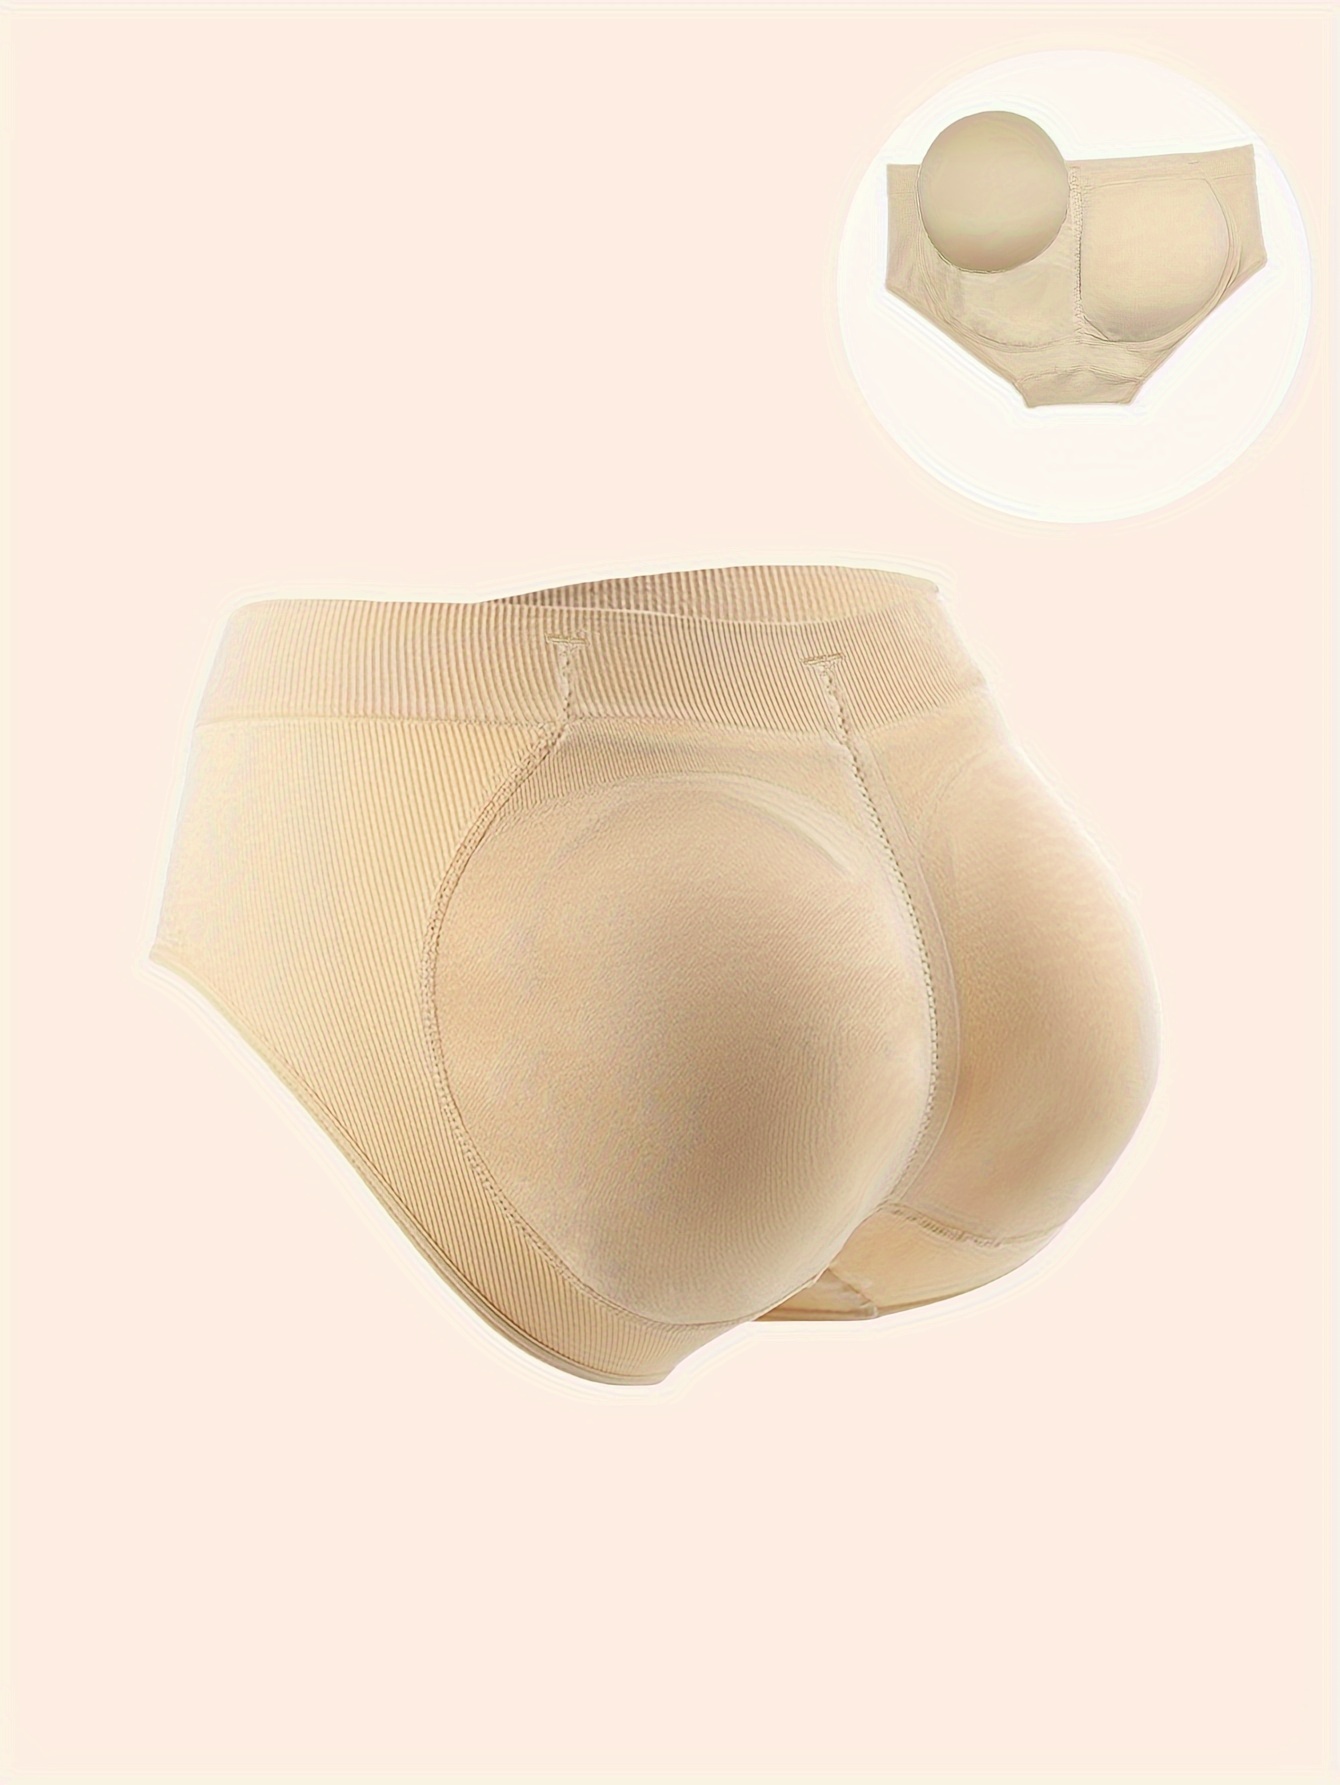 Skin-colored Silicone Butt Lifter Panties For Women, Butt Enhancer Shapewear